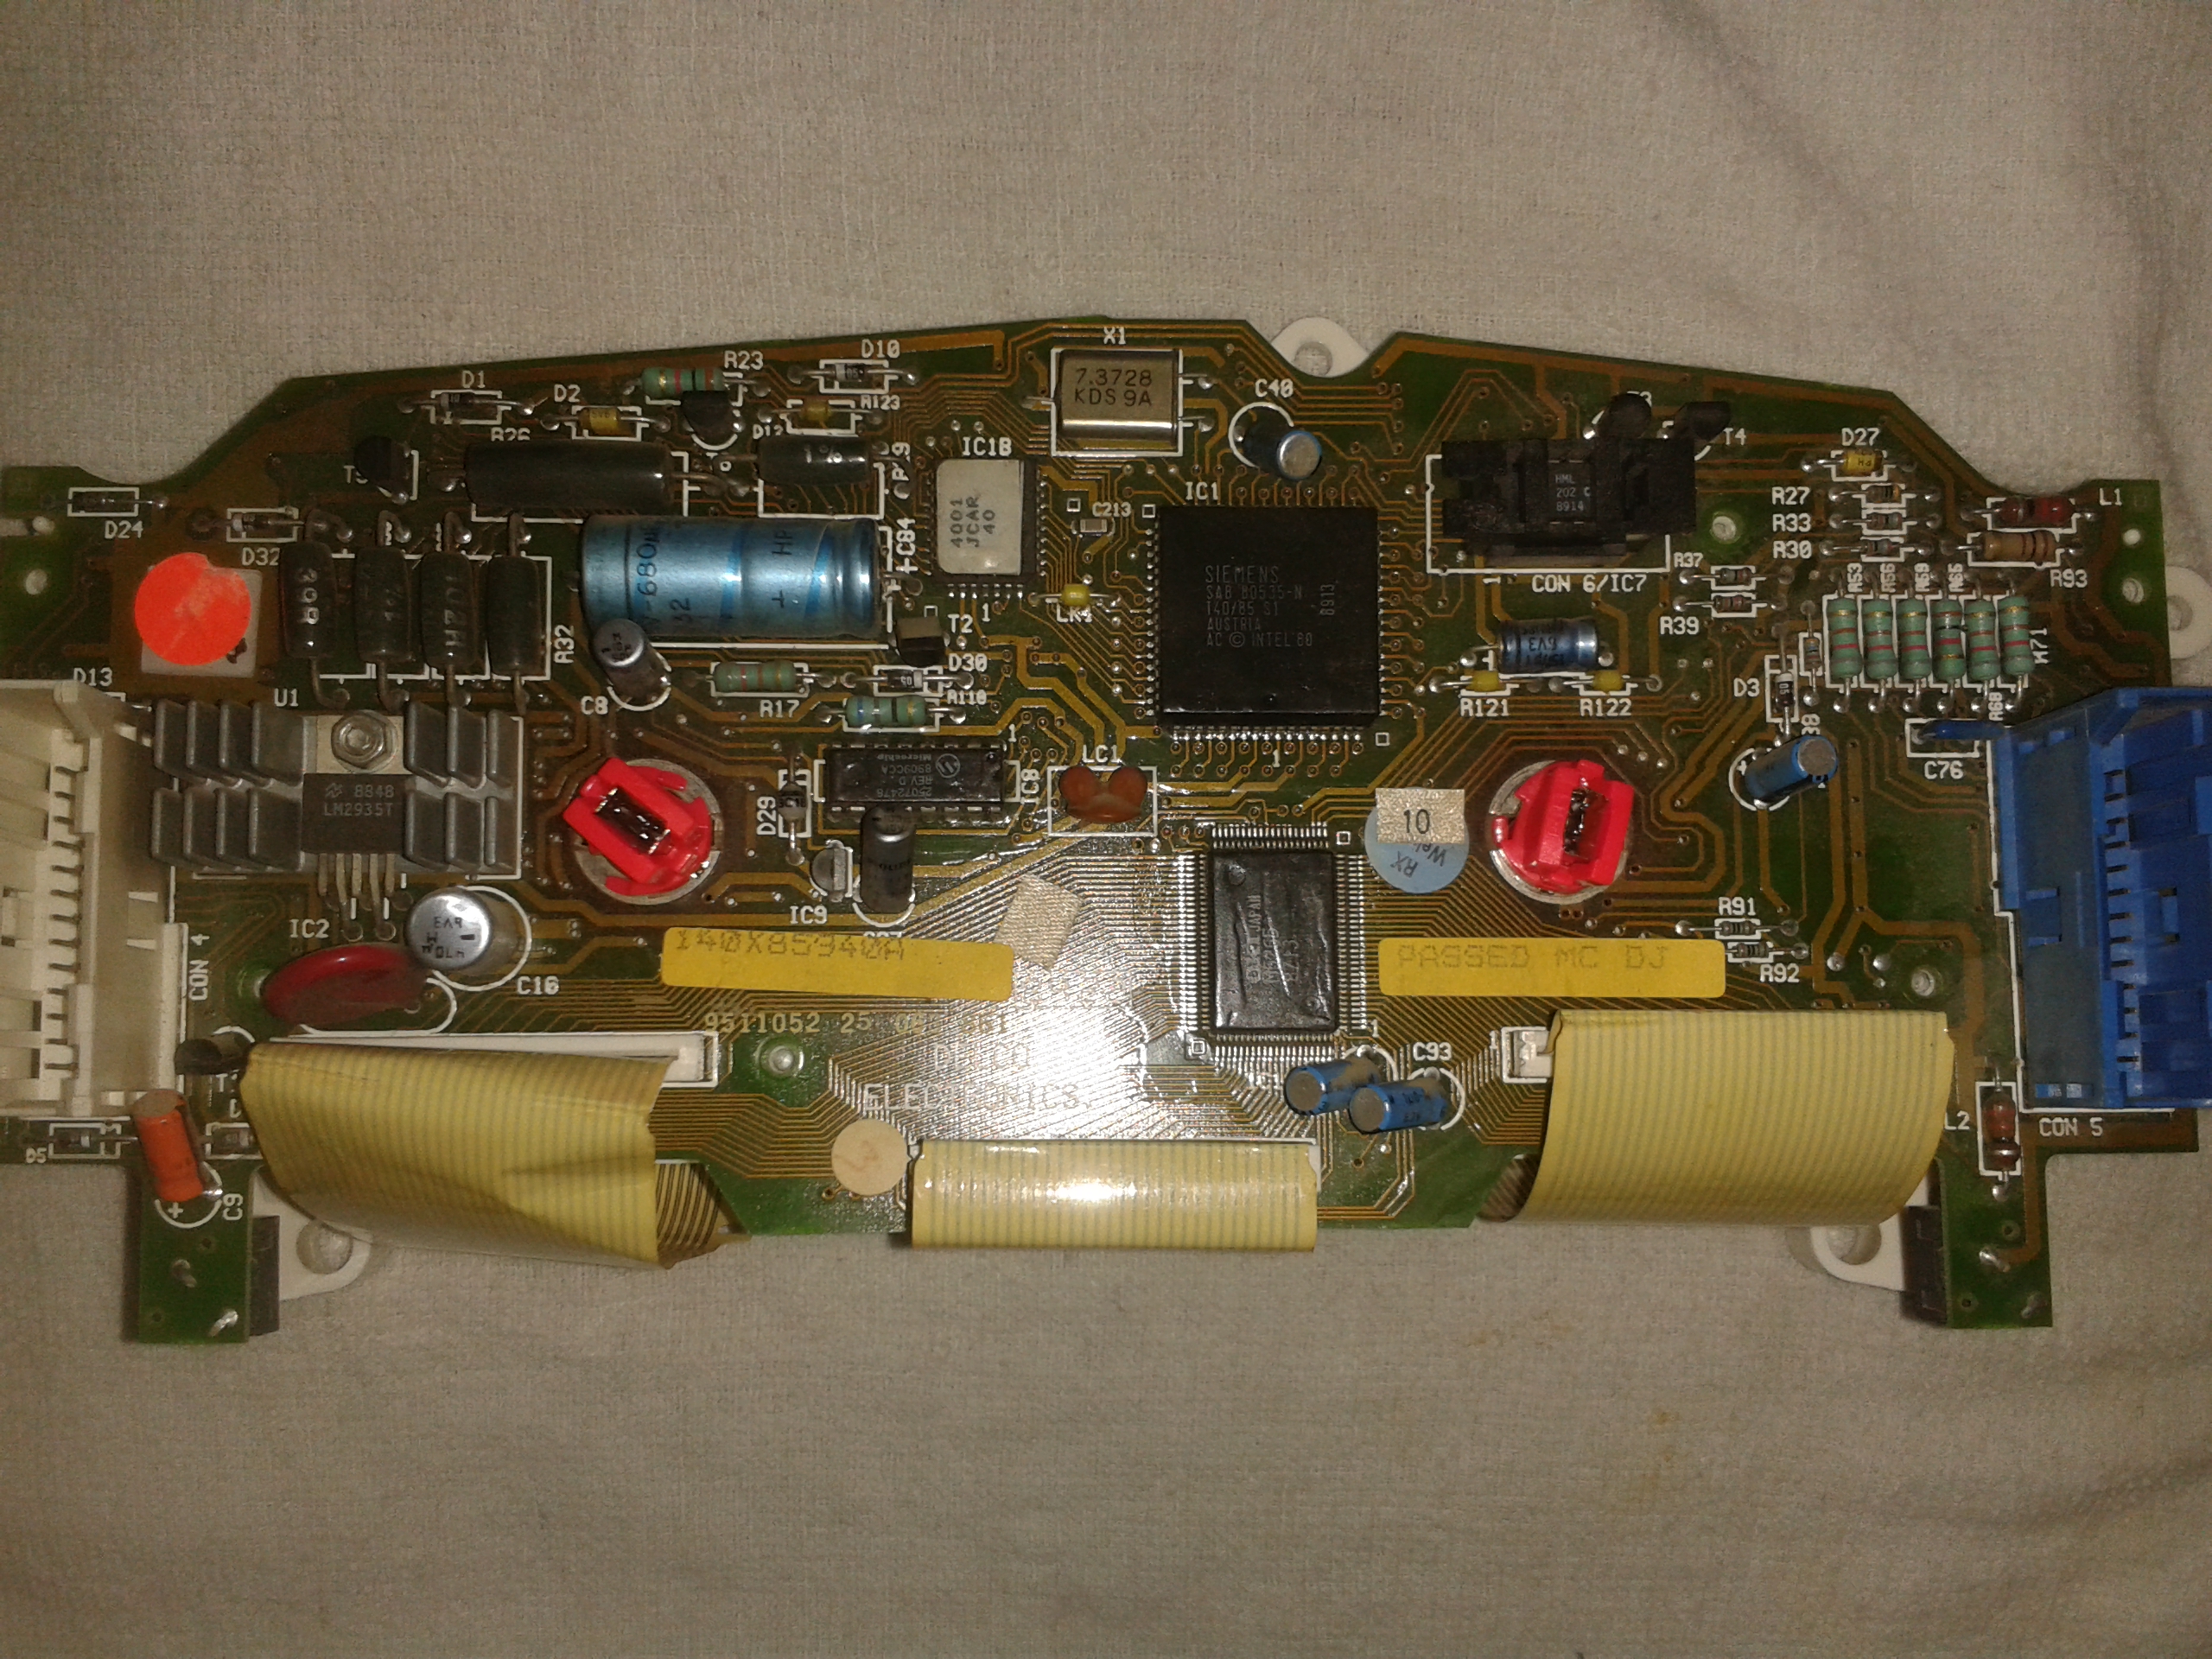 The reverse of the PCB